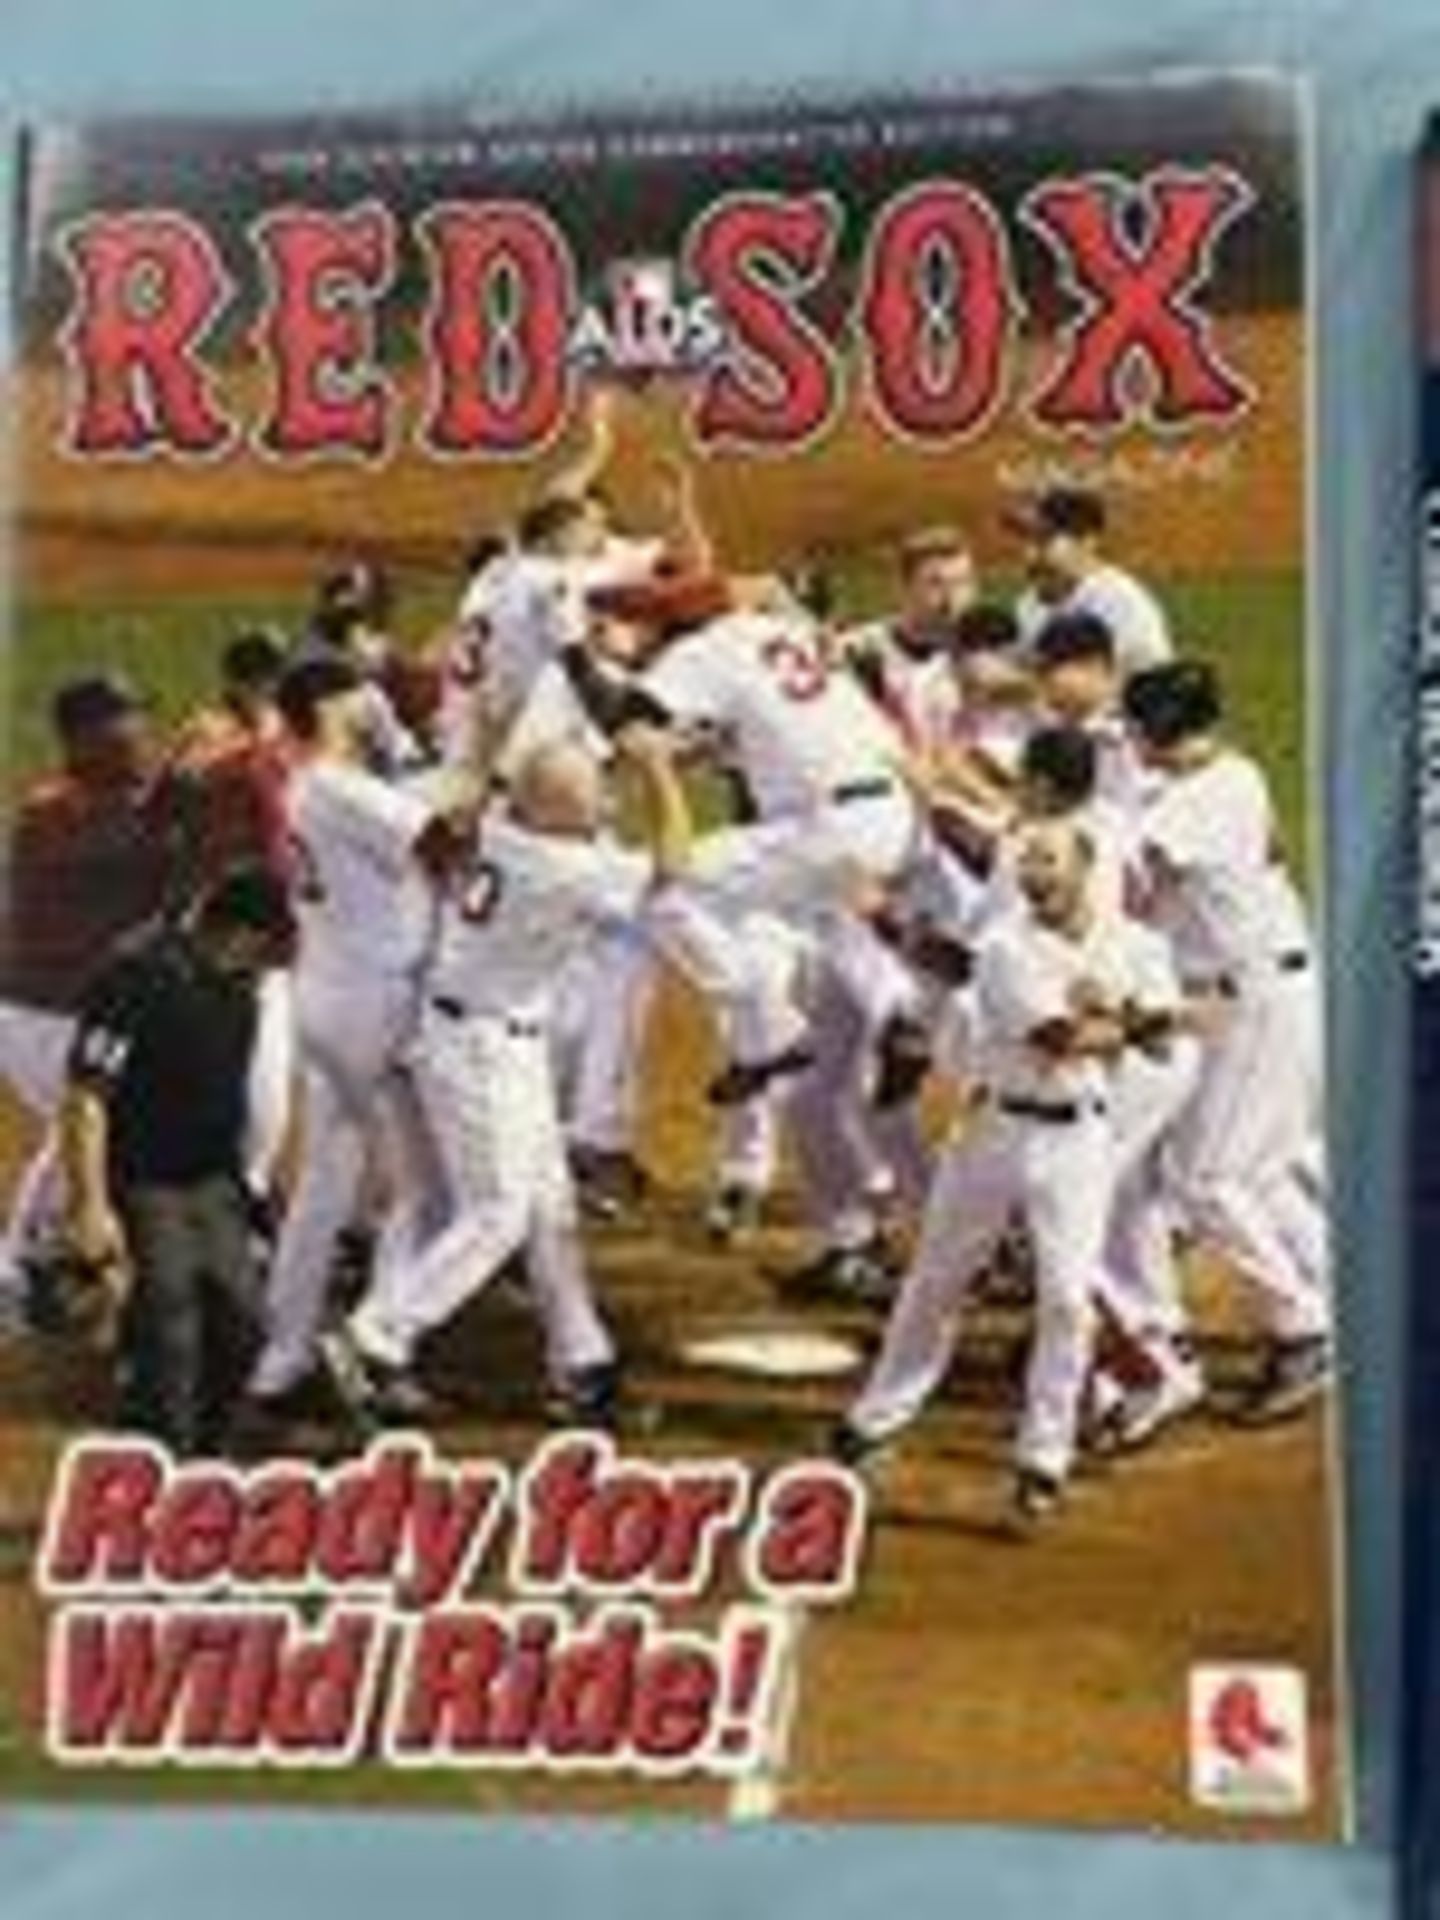 (Lot) David Ortiz Red Sox c/o: Red sox Wheaties 2004 Champion Box, 2013 Champions cup, 2013 World - Image 8 of 16